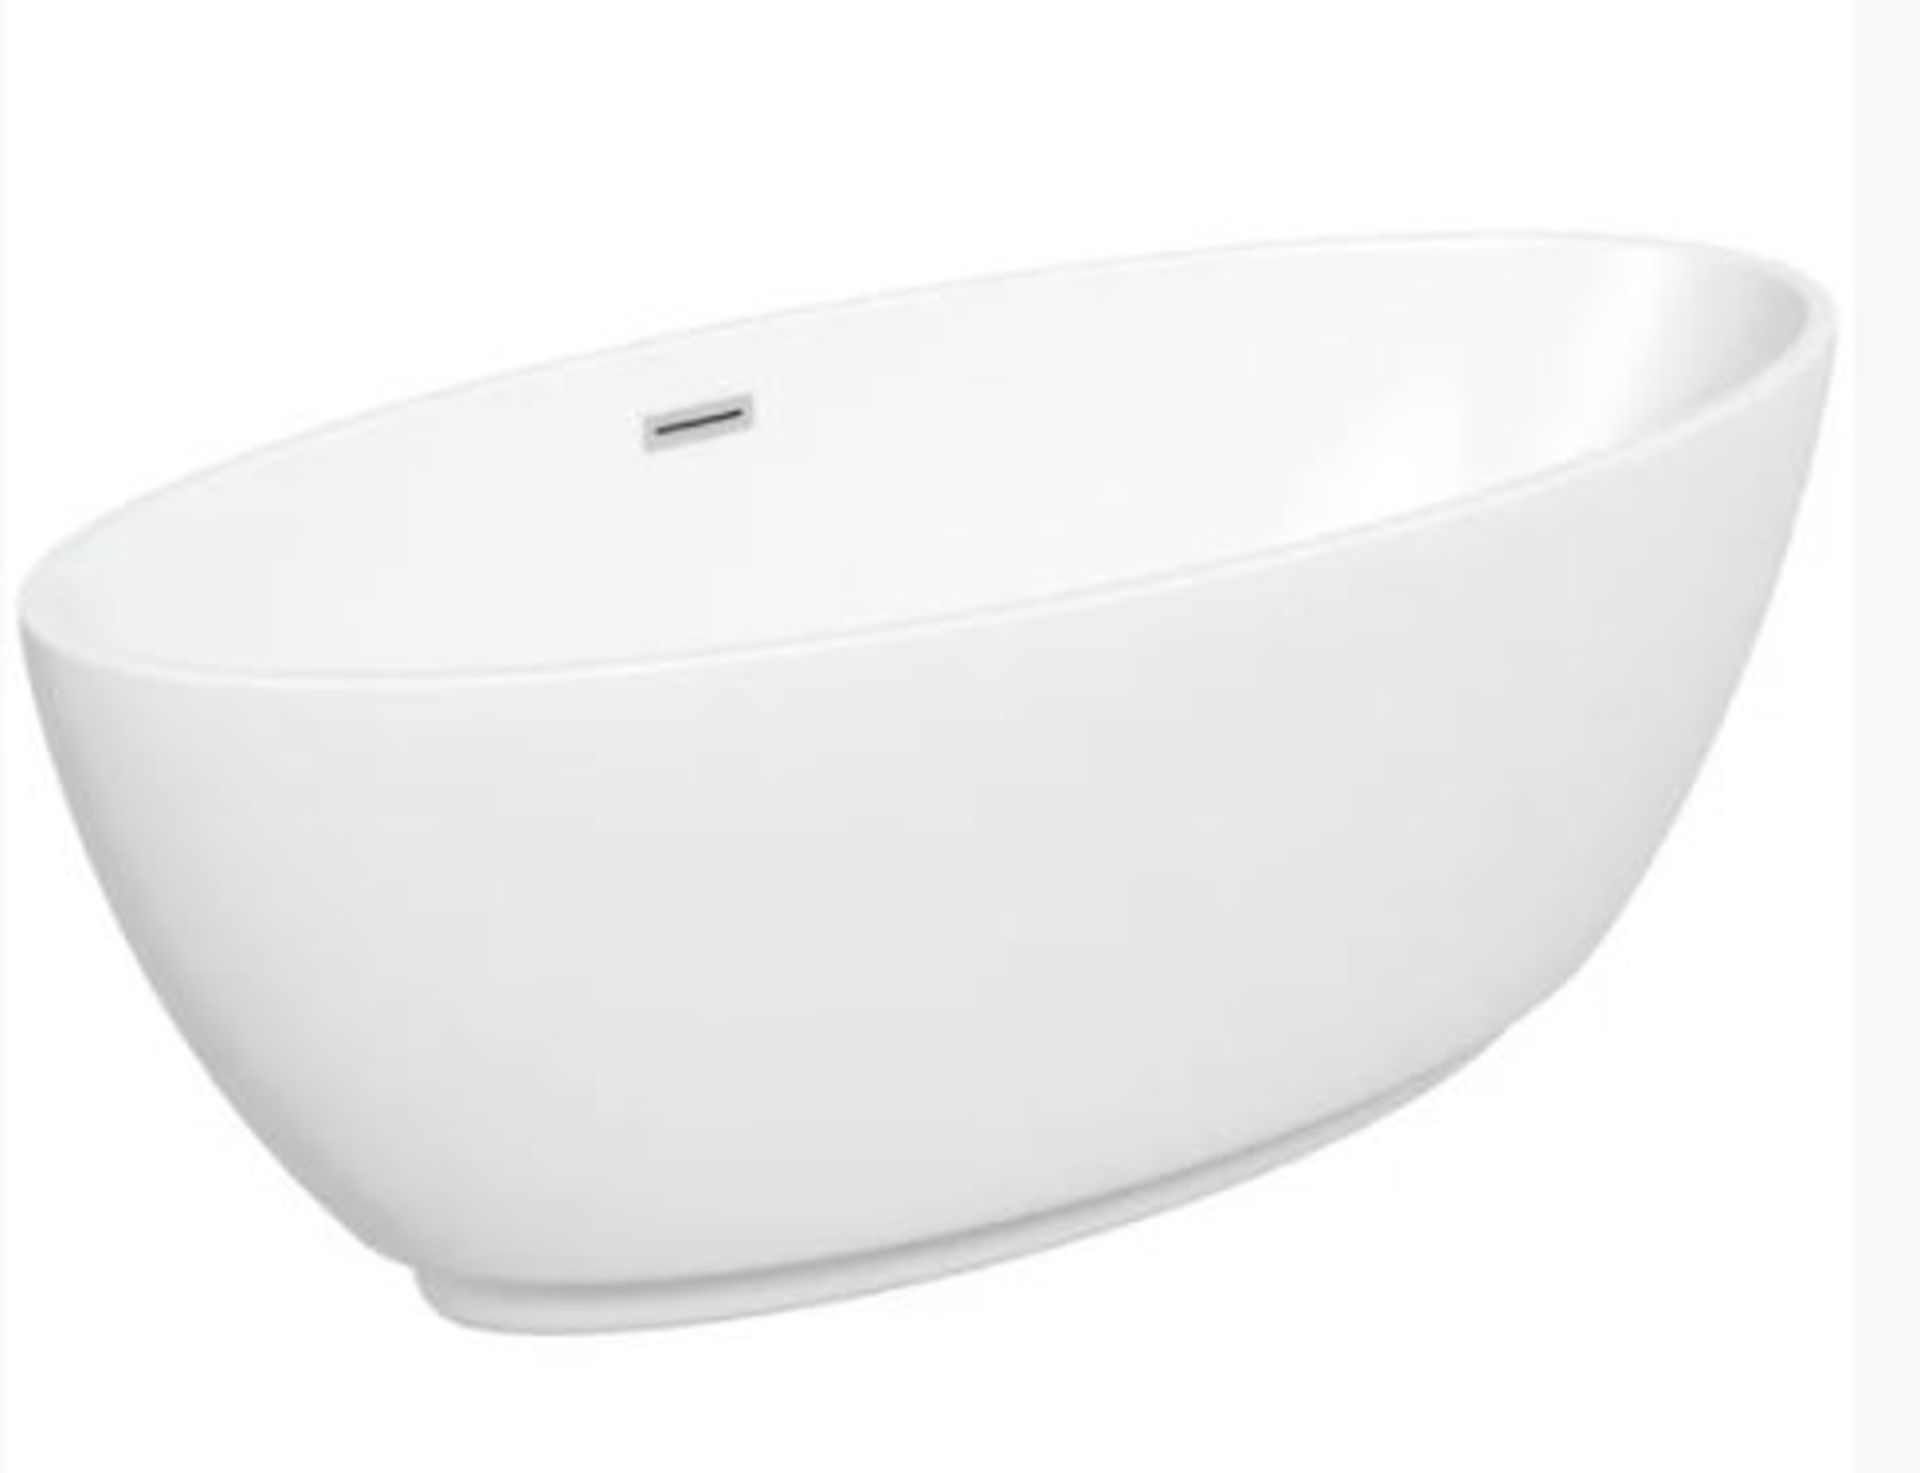 1 X Harrison Freestanding Bath With Waste Mode H600 X W810 X L1790 (rbaif2001) RRP £800 - Image 4 of 7